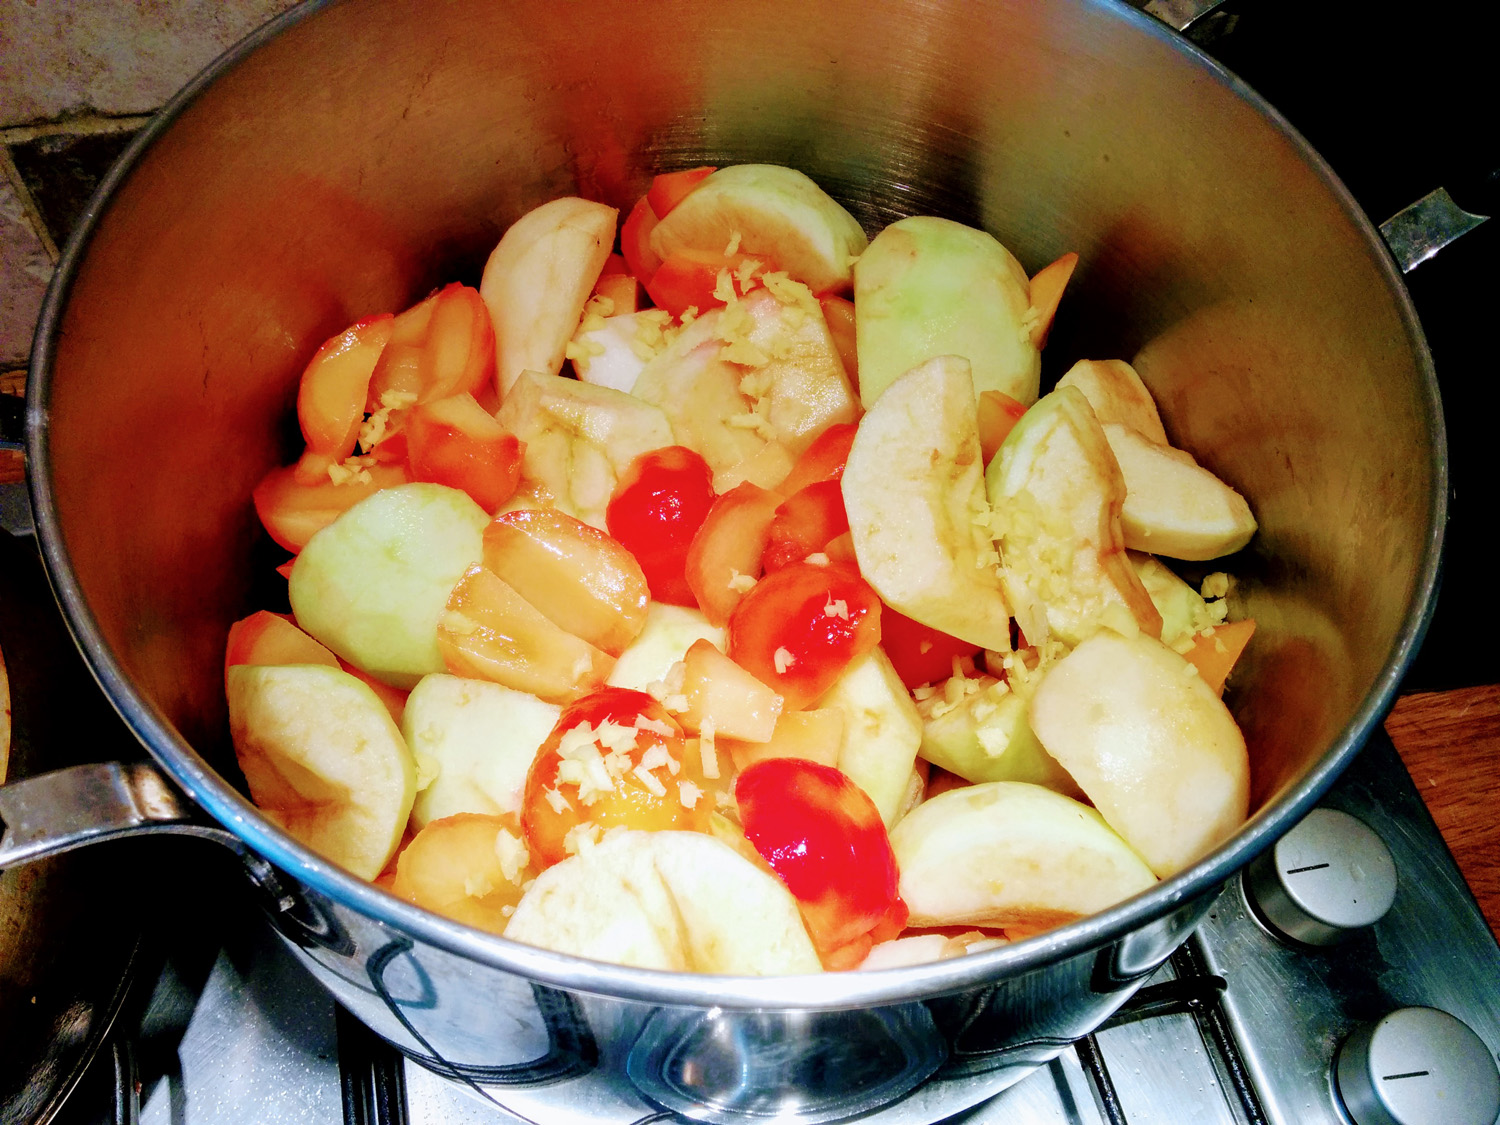 When I first put the fruit in the pan it looked like this.